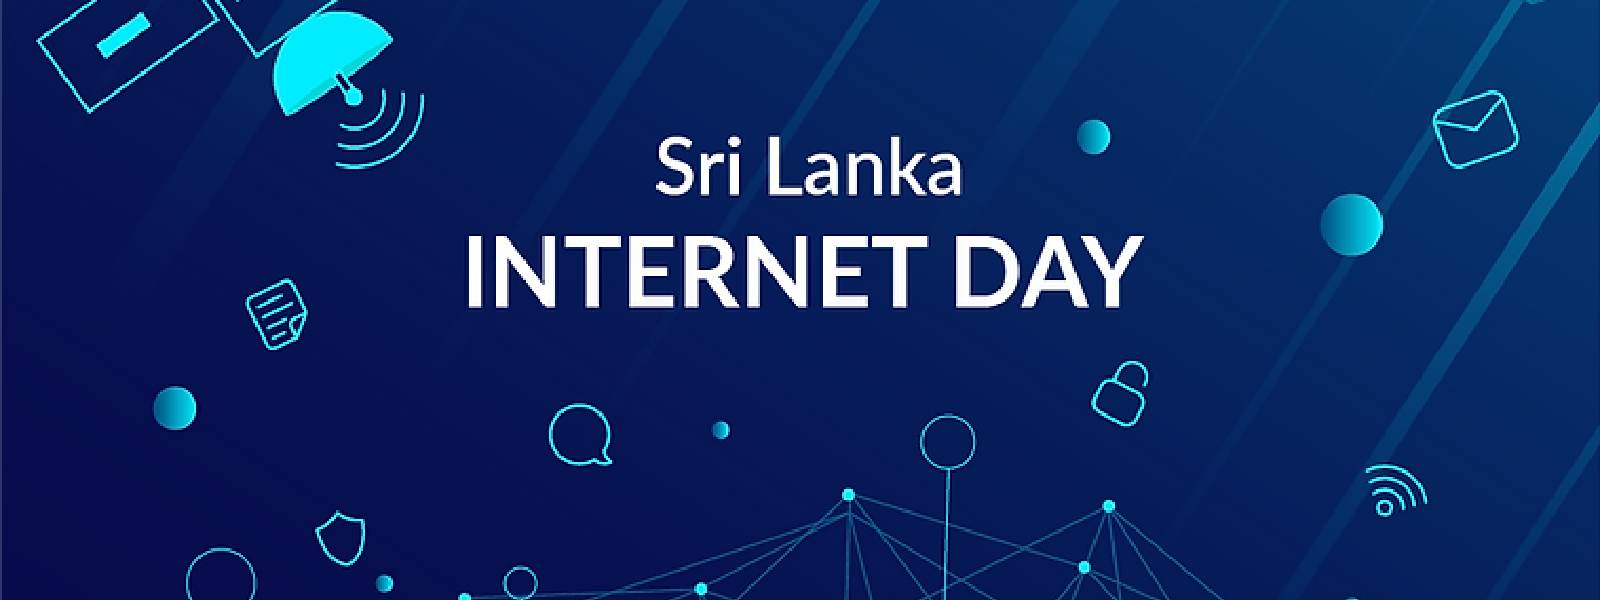 Internet Day 2022 - Conducive Policies a must